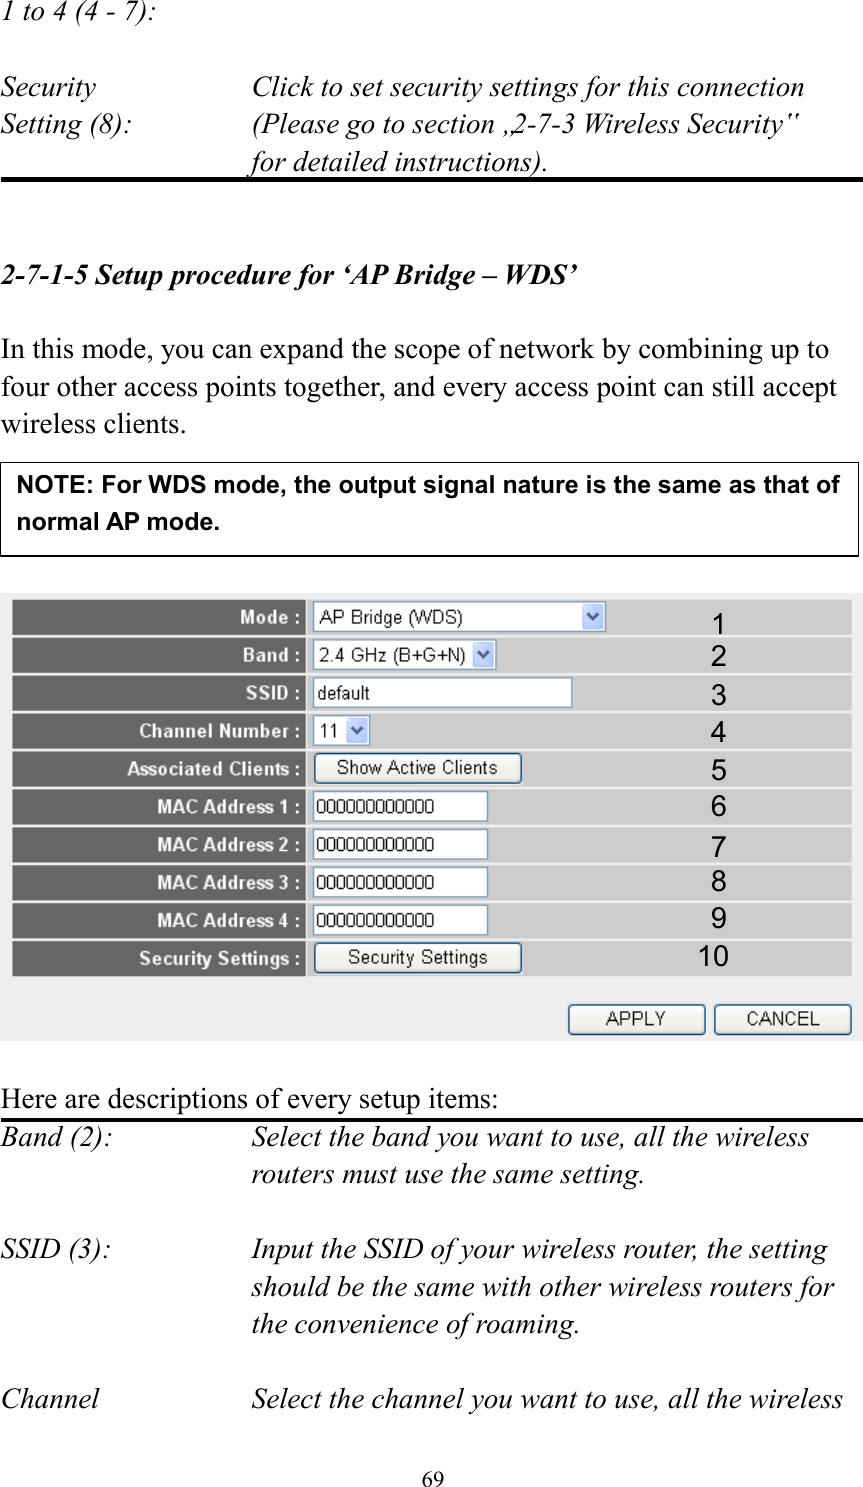  69 1 to 4 (4 - 7):    Security    Click to set security settings for this connection Setting (8):  (Please go to section „2-7-3 Wireless Security‟   for detailed instructions).   2-7-1-5 Setup procedure for ‘AP Bridge – WDS’  In this mode, you can expand the scope of network by combining up to four other access points together, and every access point can still accept wireless clients.       Here are descriptions of every setup items: Band (2):  Select the band you want to use, all the wireless routers must use the same setting.  SSID (3):  Input the SSID of your wireless router, the setting should be the same with other wireless routers for the convenience of roaming.  Channel  Select the channel you want to use, all the wireless 1 2 3 4 5 7 8 6 9 10 NOTE: For WDS mode, the output signal nature is the same as that of normal AP mode.   